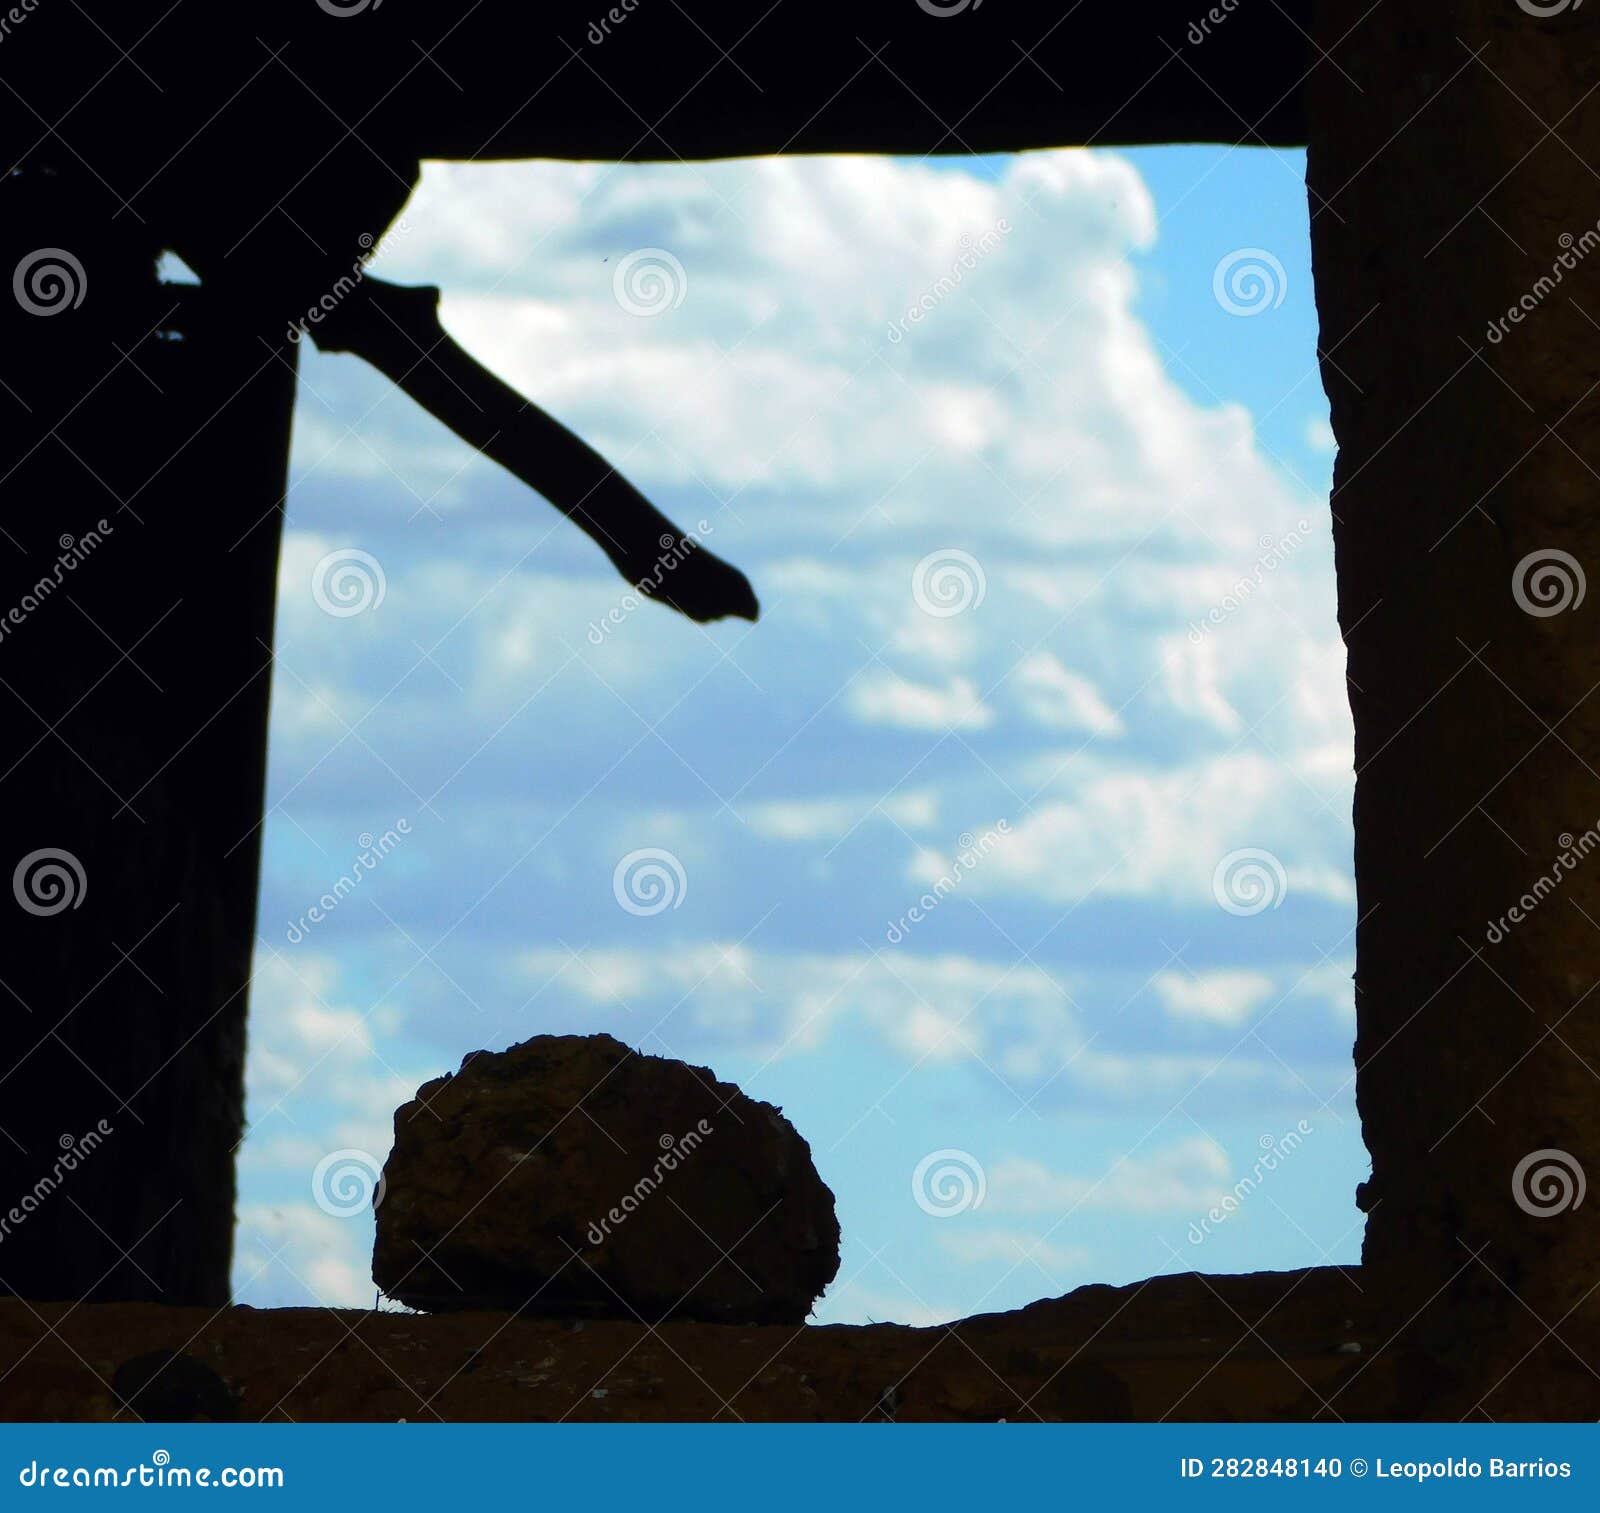 old window and clouds in rural landscapes in zamora province